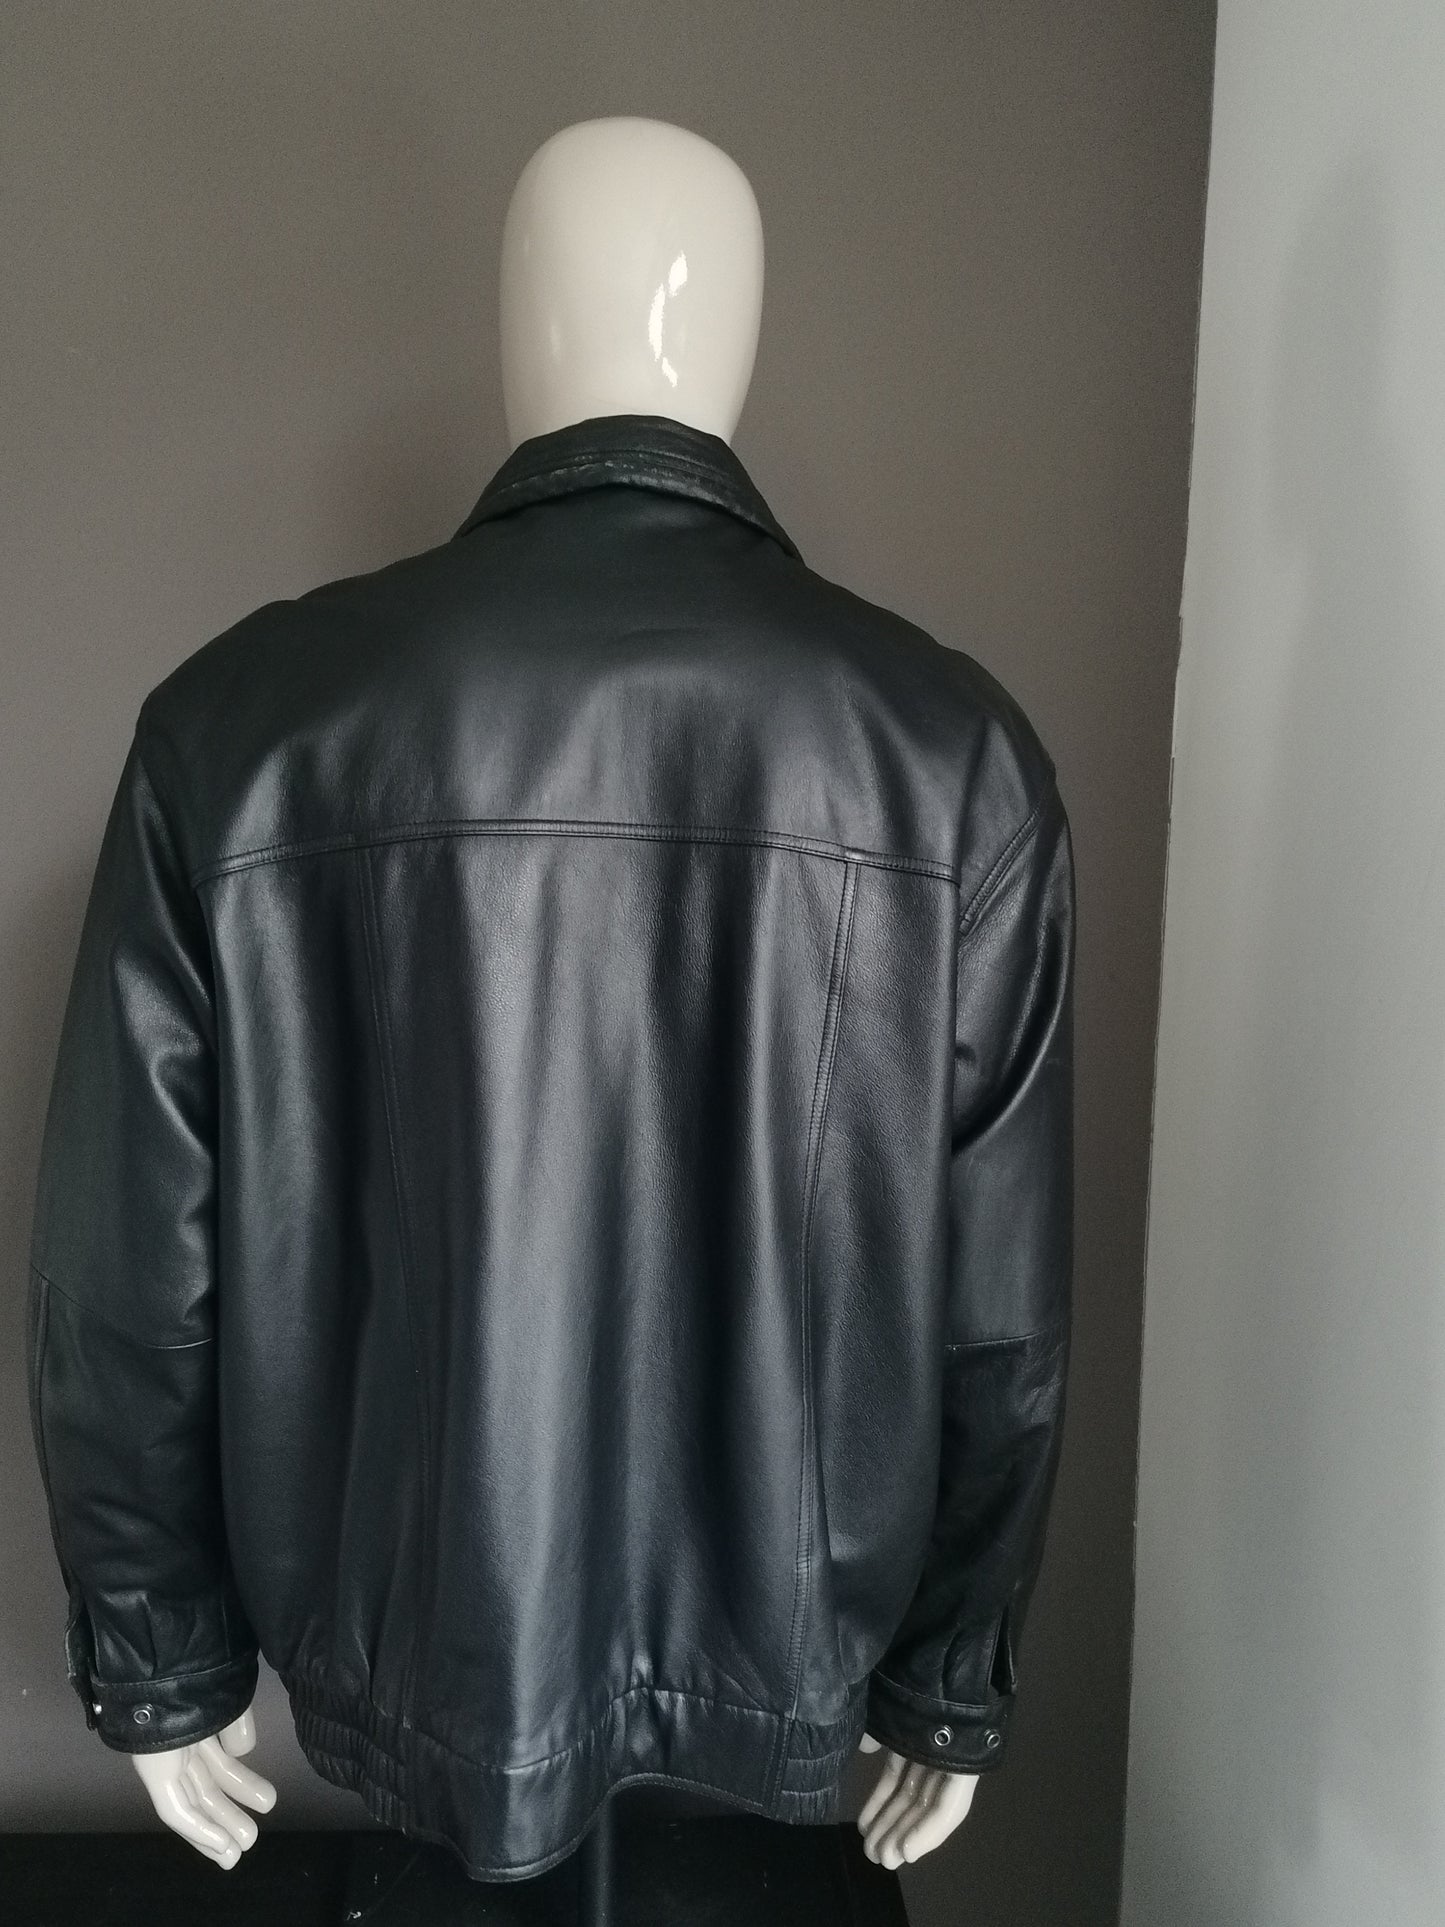 Vintage leather jacket. Lined with double closure and bags. Black colored. Size 56 / XL.